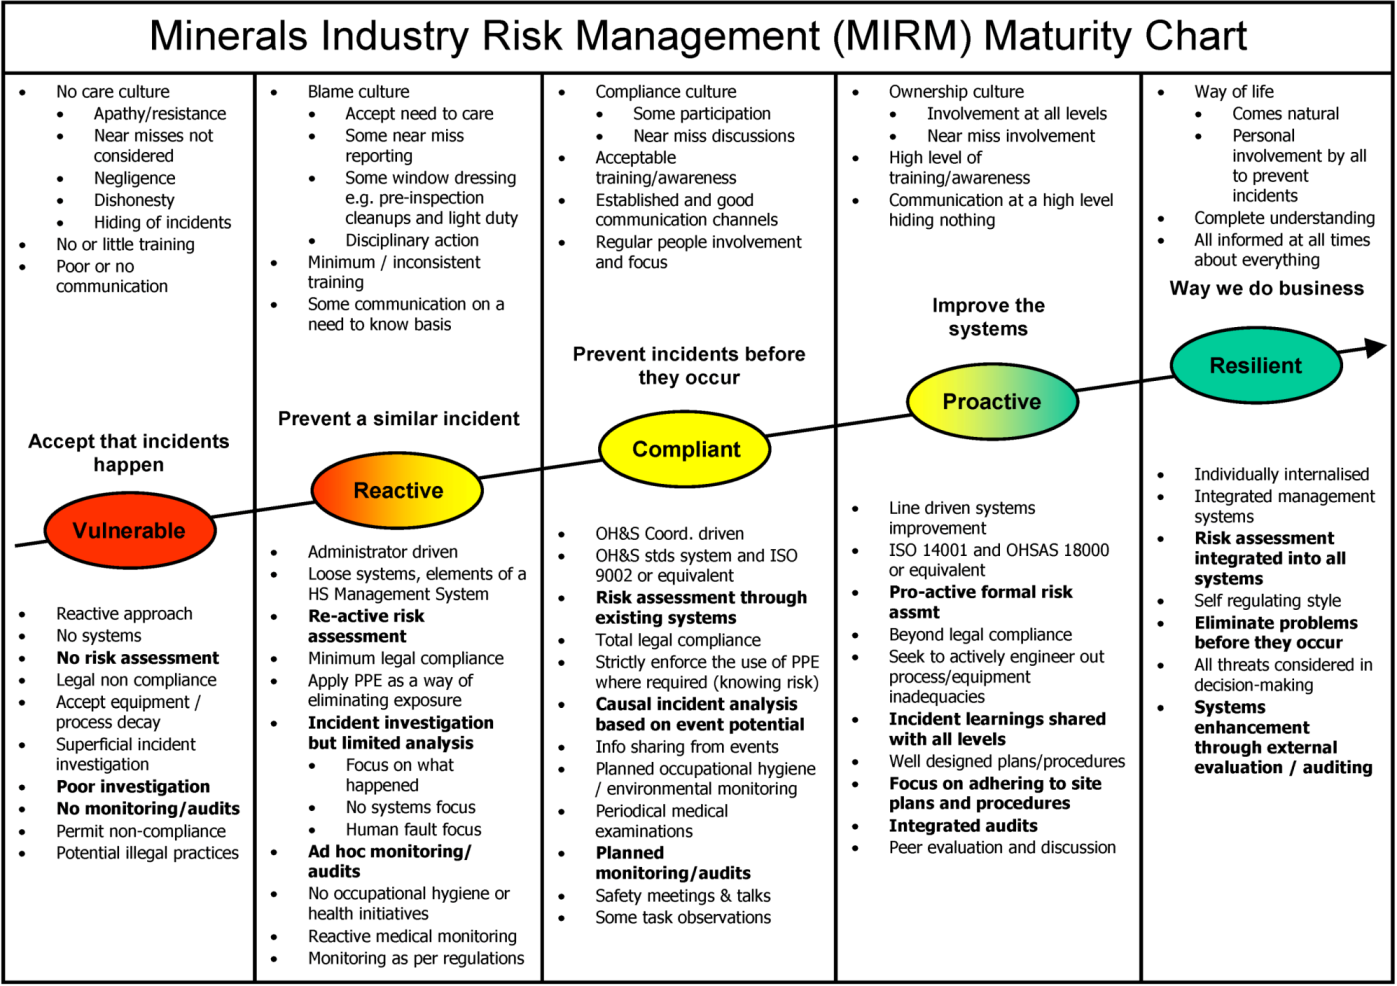 A diagram depicting risk management in the mineral industry with an emphasis on IT consulting and data recovery.